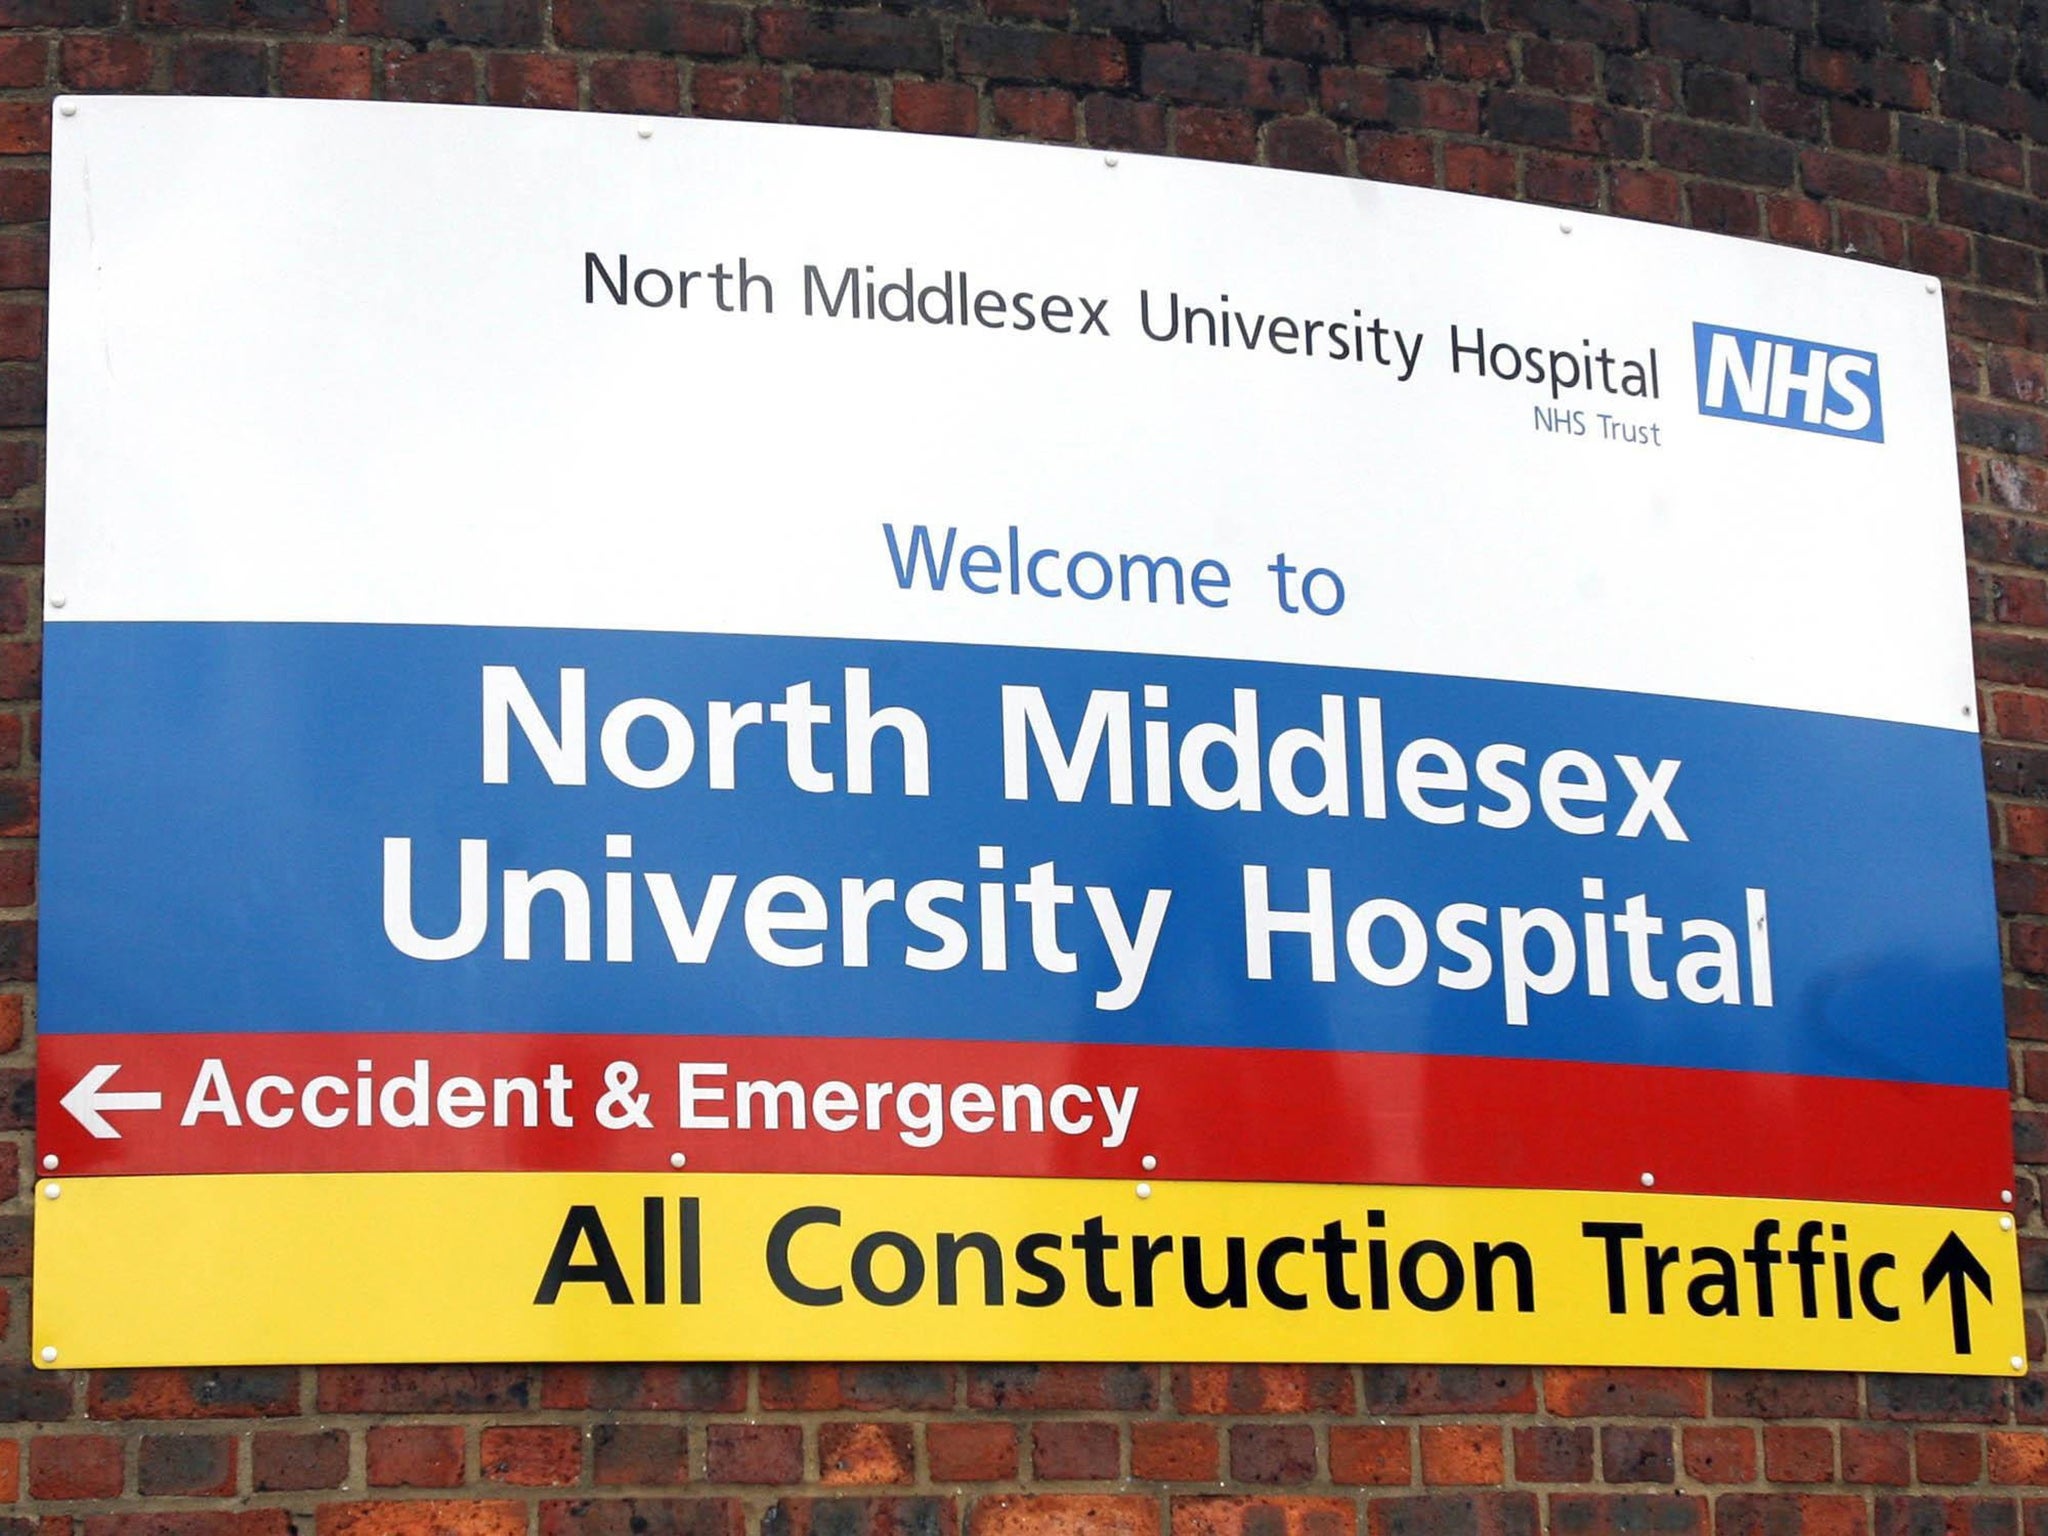 North Middlesex University Hospital has seen record levels of A&E attendances in recent months